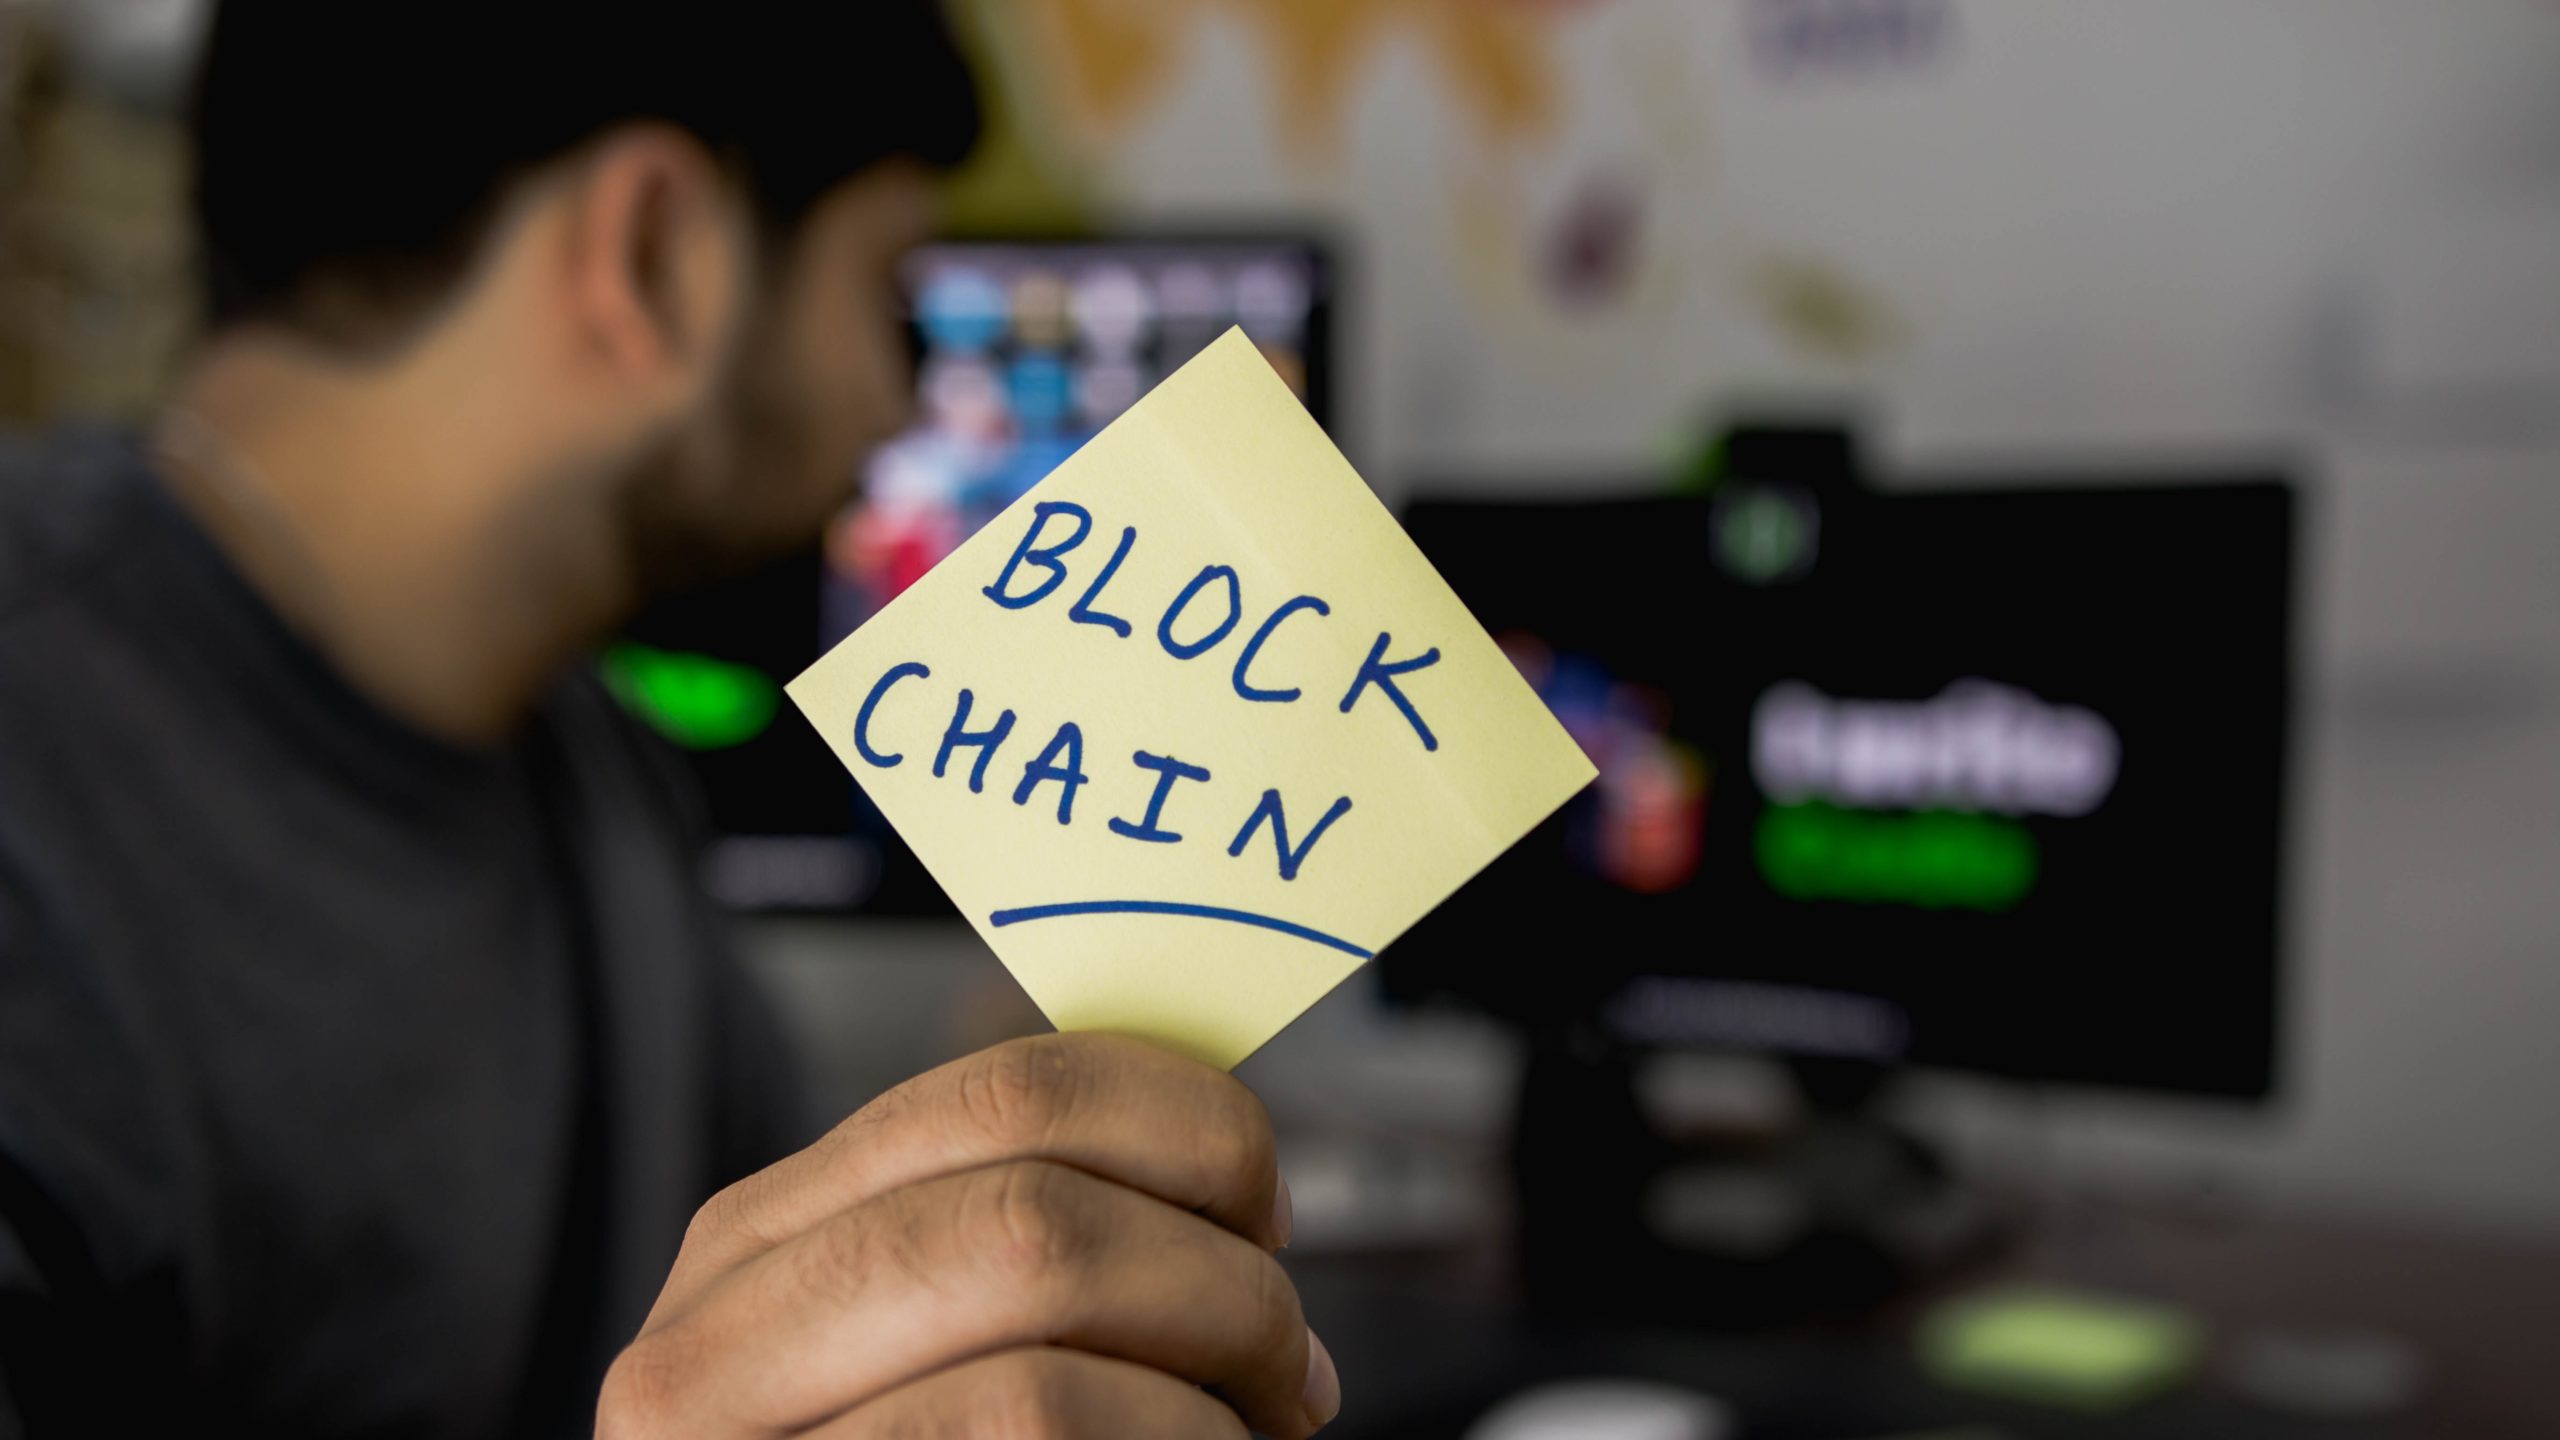 How Blockchain Technology Can Benefit the Internet of Things